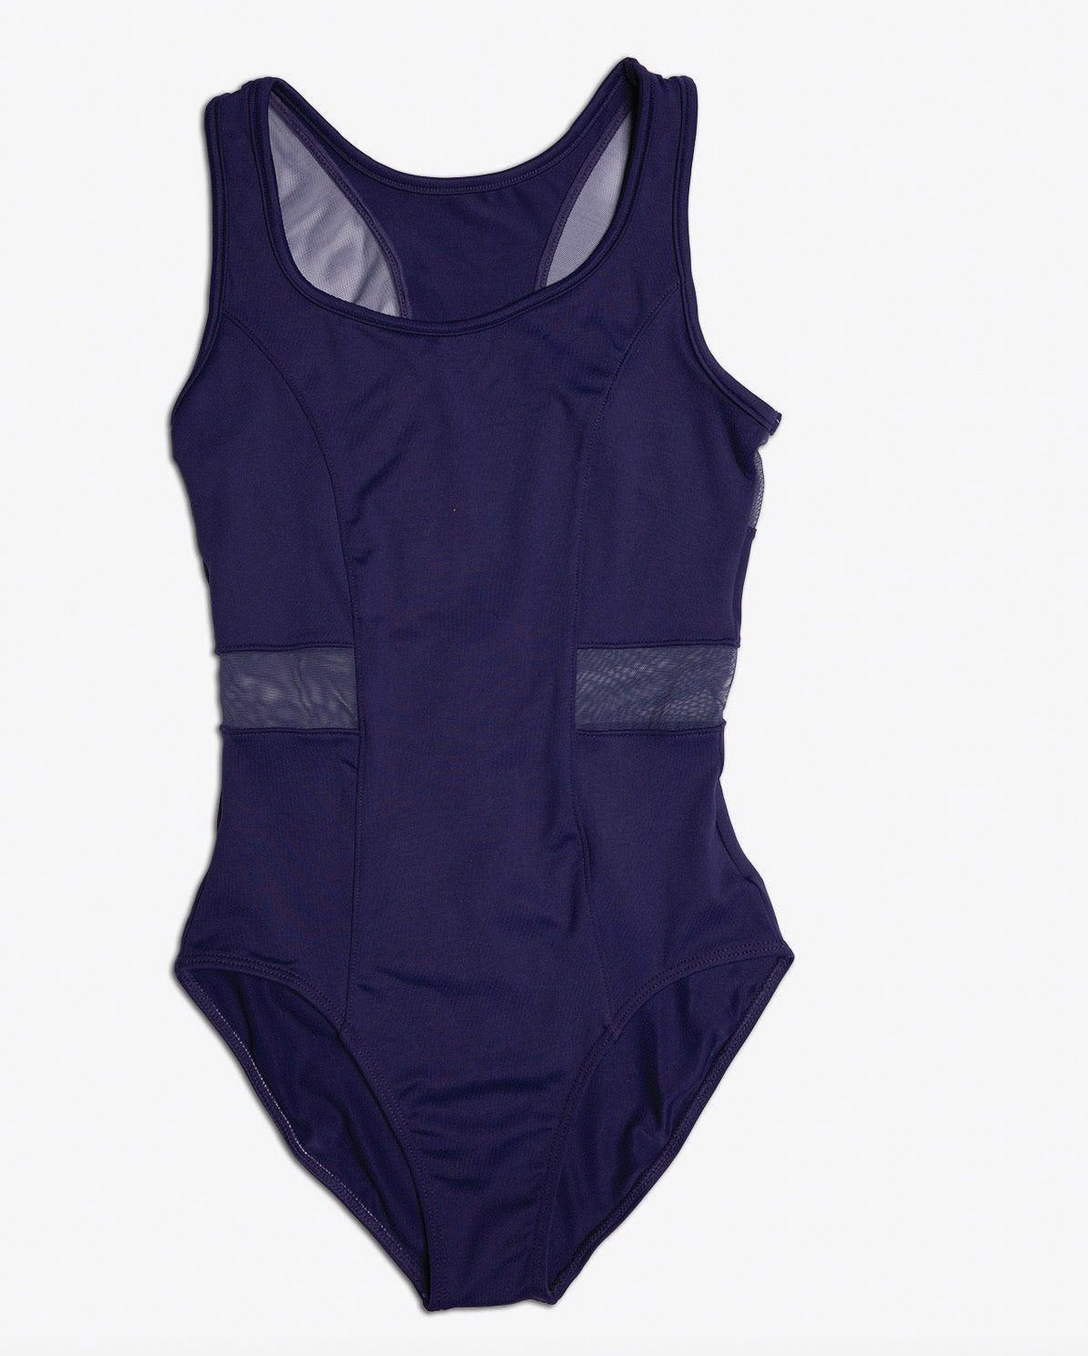 Tank Princess Seamed Leotard with Mesh Racerback and Waist Accent